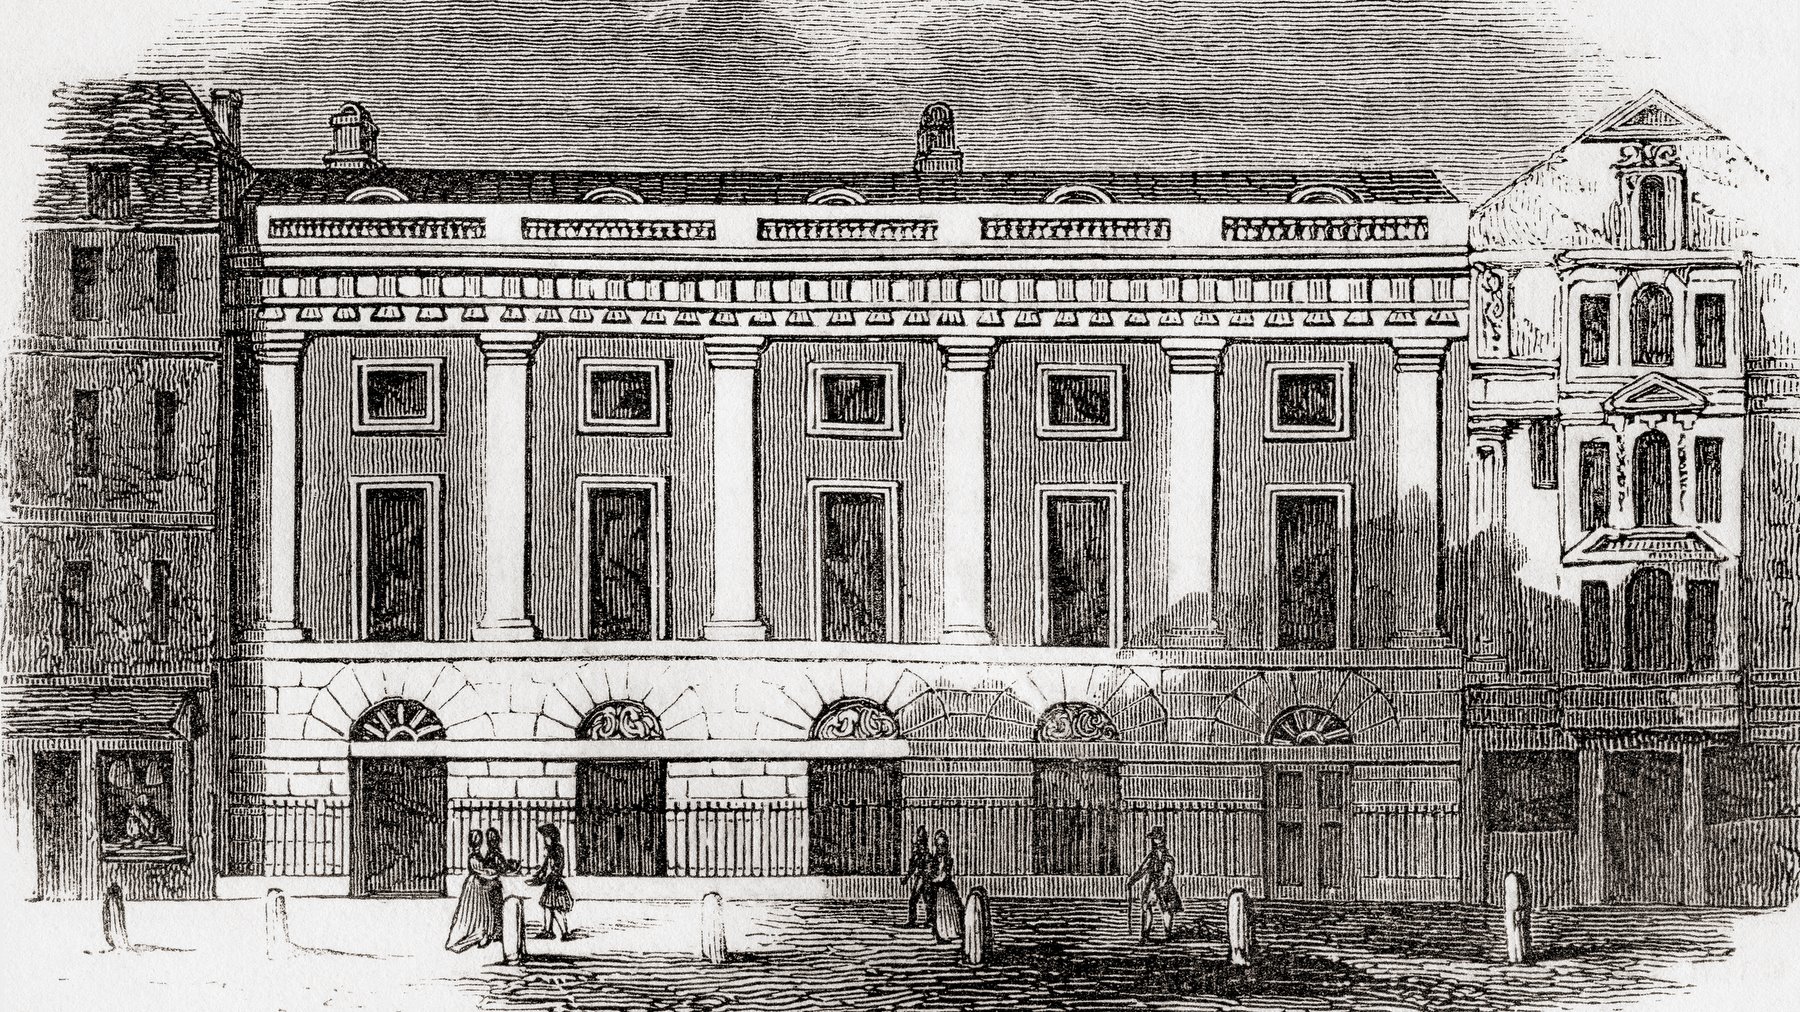 The East India House, London, England, 1726, the Leadenhall Street frontage as rebuilt by Theodore Jacobsen in 1726-9.  From Old England: A Pictorial Museum, published 1847.(Photo by: Universal History Archive/Universal Images Group via Getty Images)